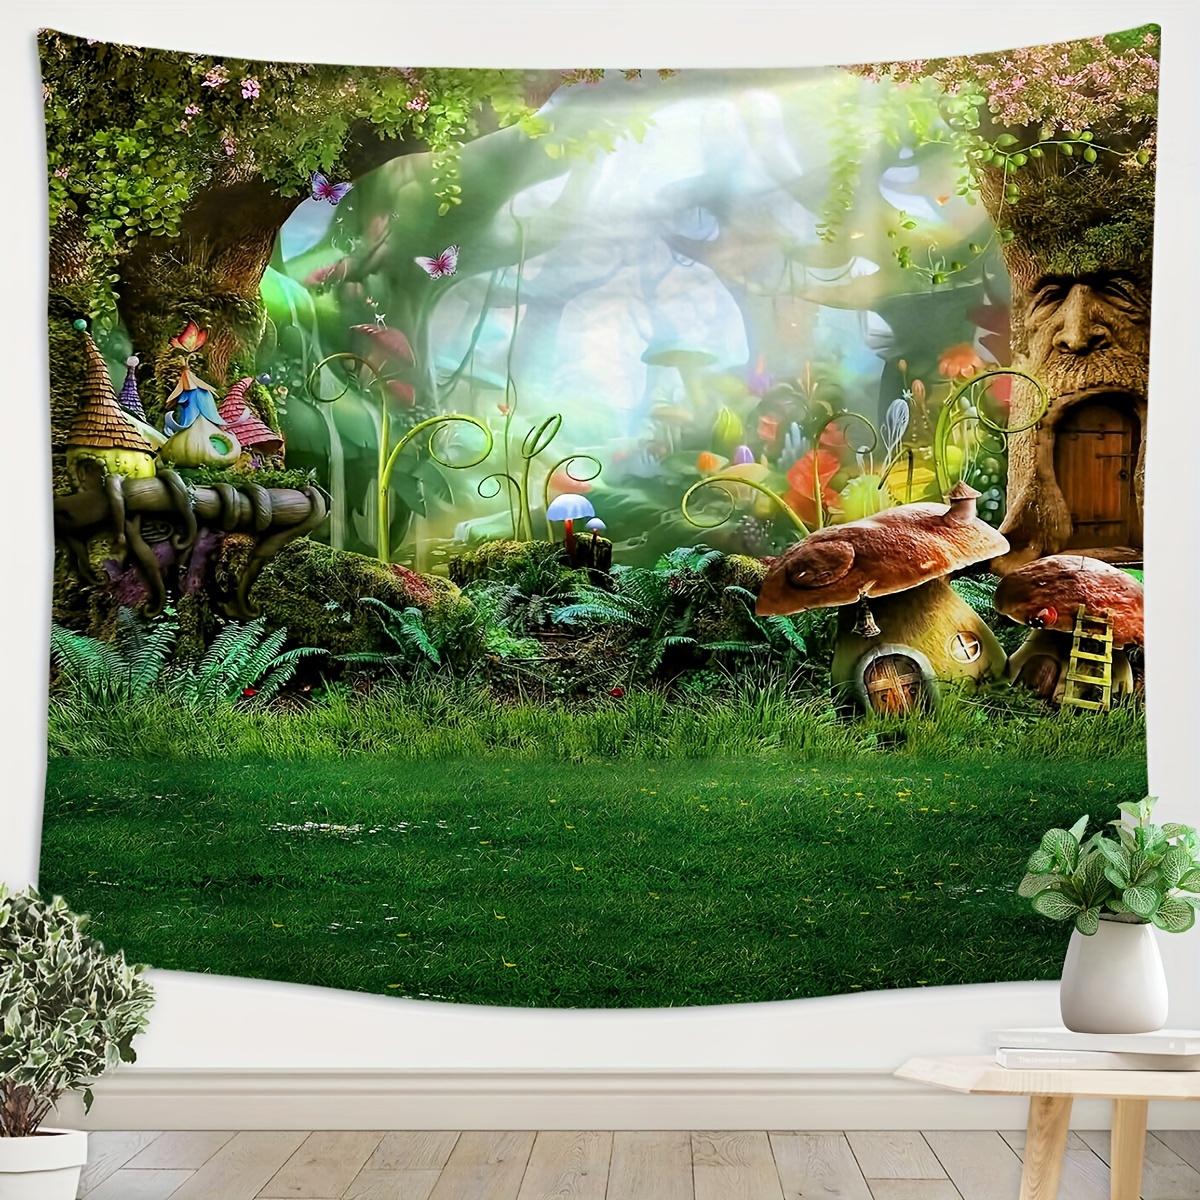 Enhanced Magical Fantasy Forest Tapestry Wall Hanging Art for Kids Room  Dorm Bedroom Magic Home Decor Gift 